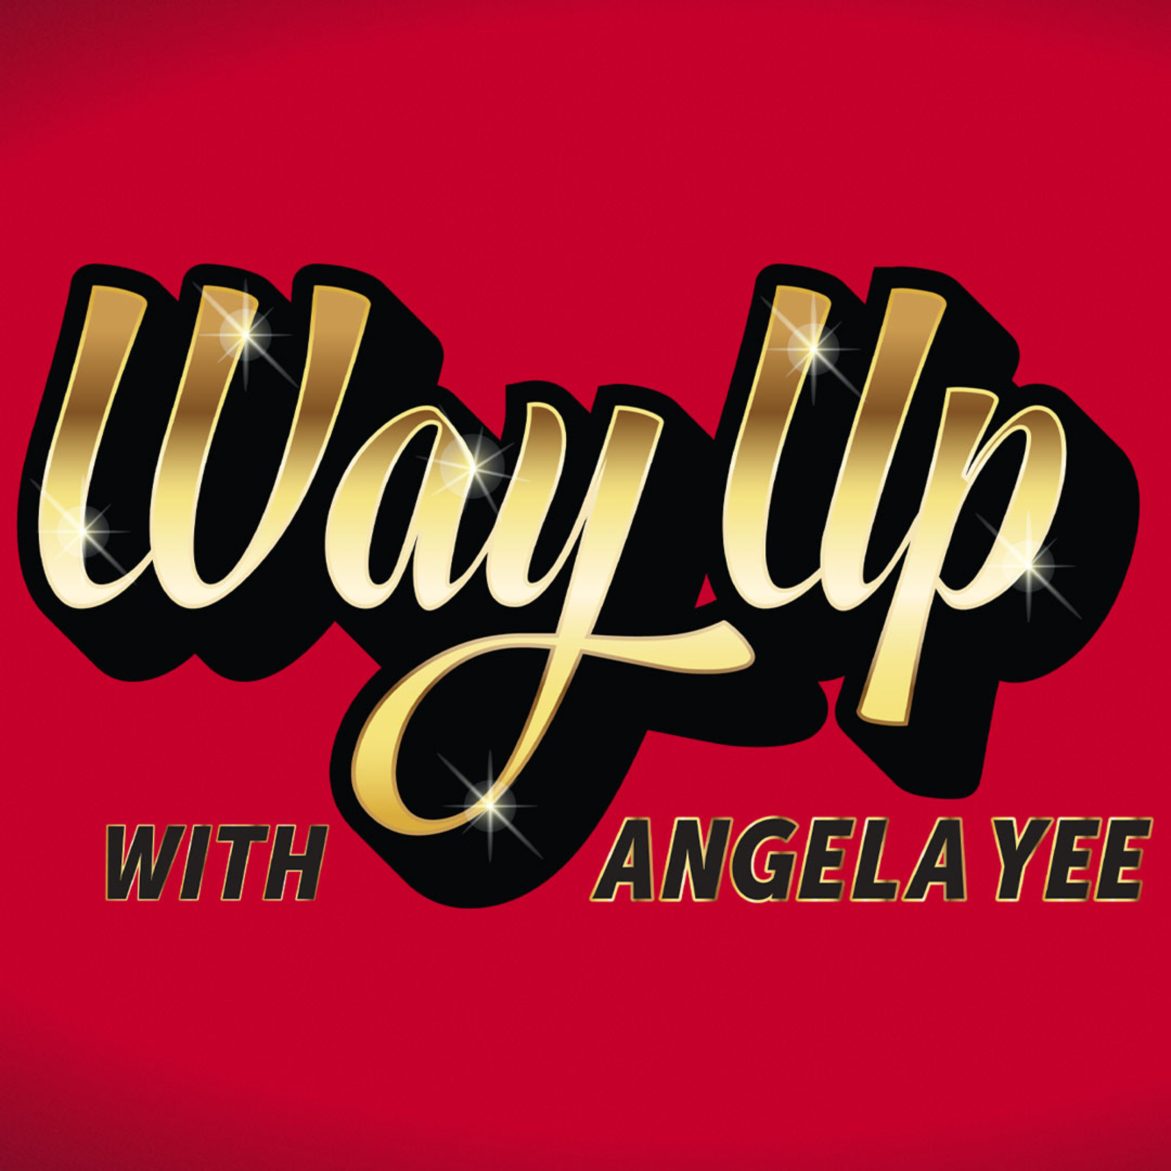 Black Podcasting - Way Up With Honey Bxby + Tell Us A Secret